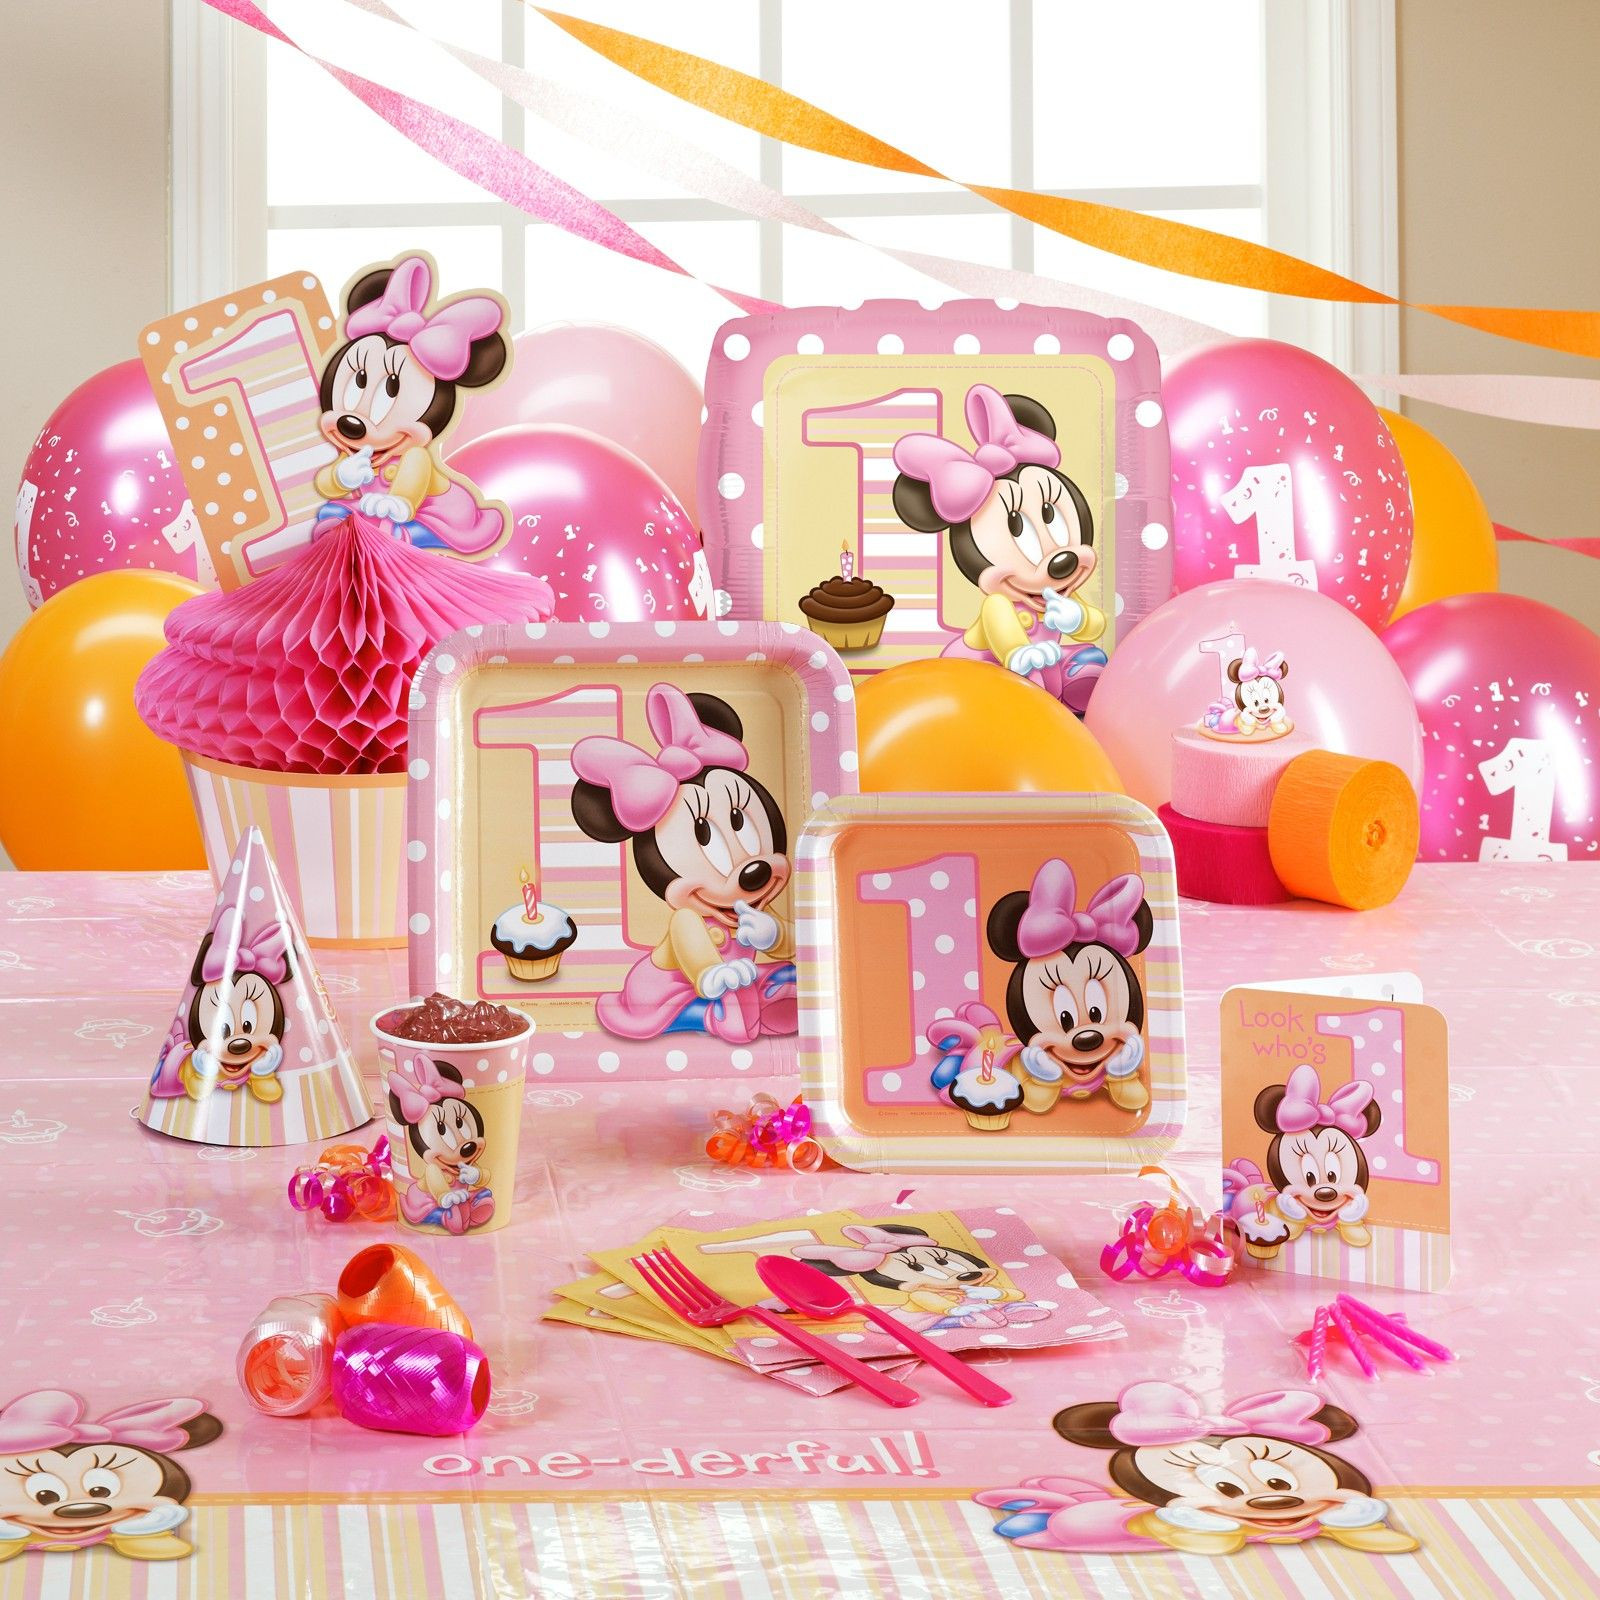 Minnie Mouse Ideas For 1st Birthday Party
 Disney Minnie s 1st Birthday Party Supplies